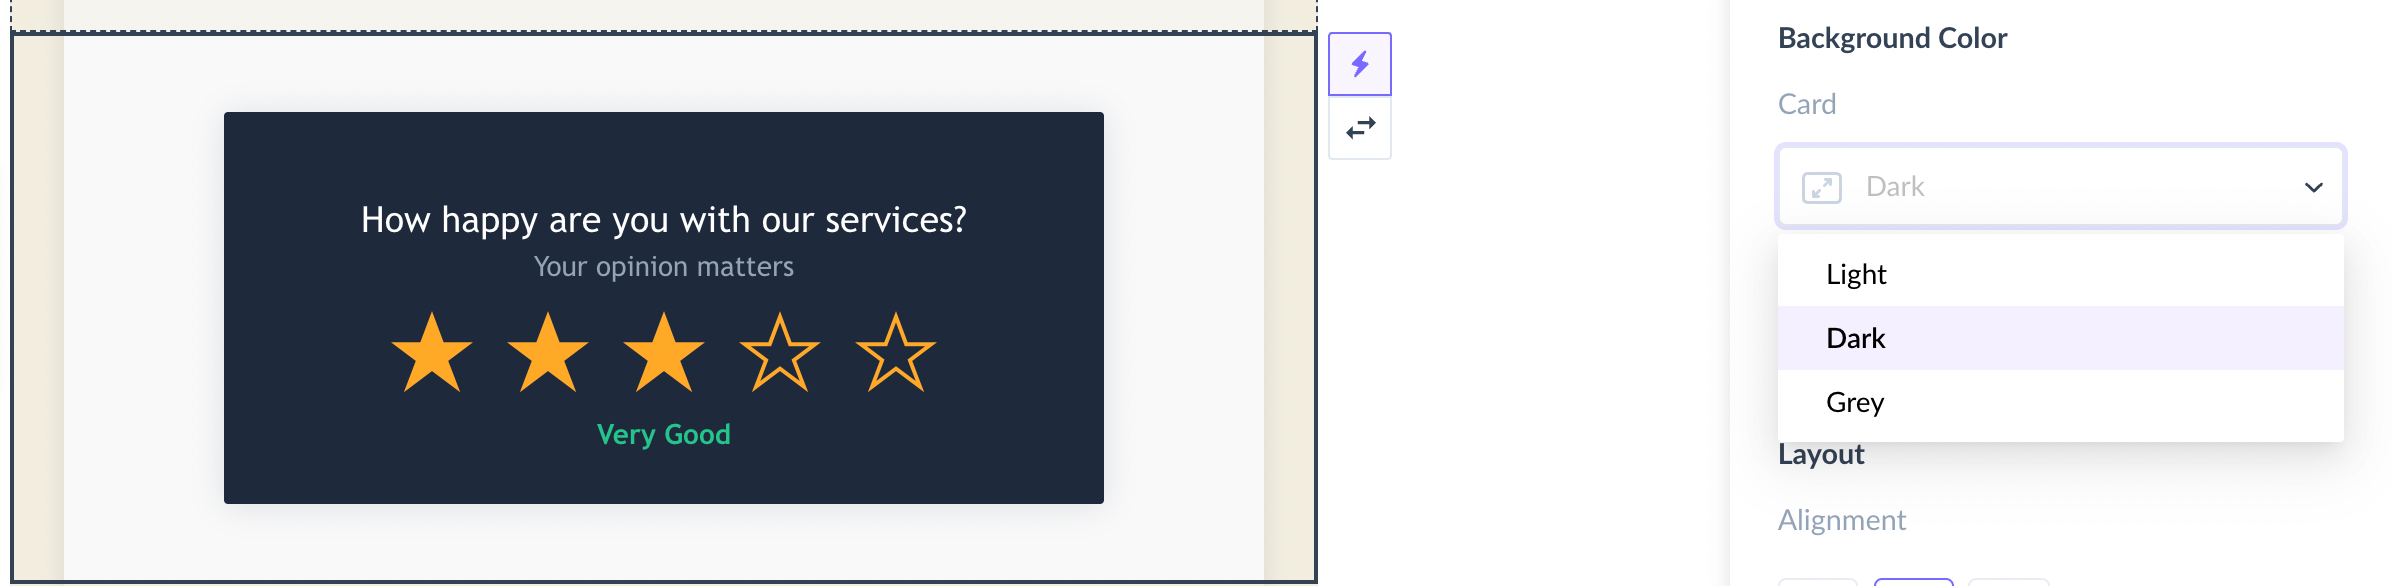 How to use Star Rating Widget in your template?